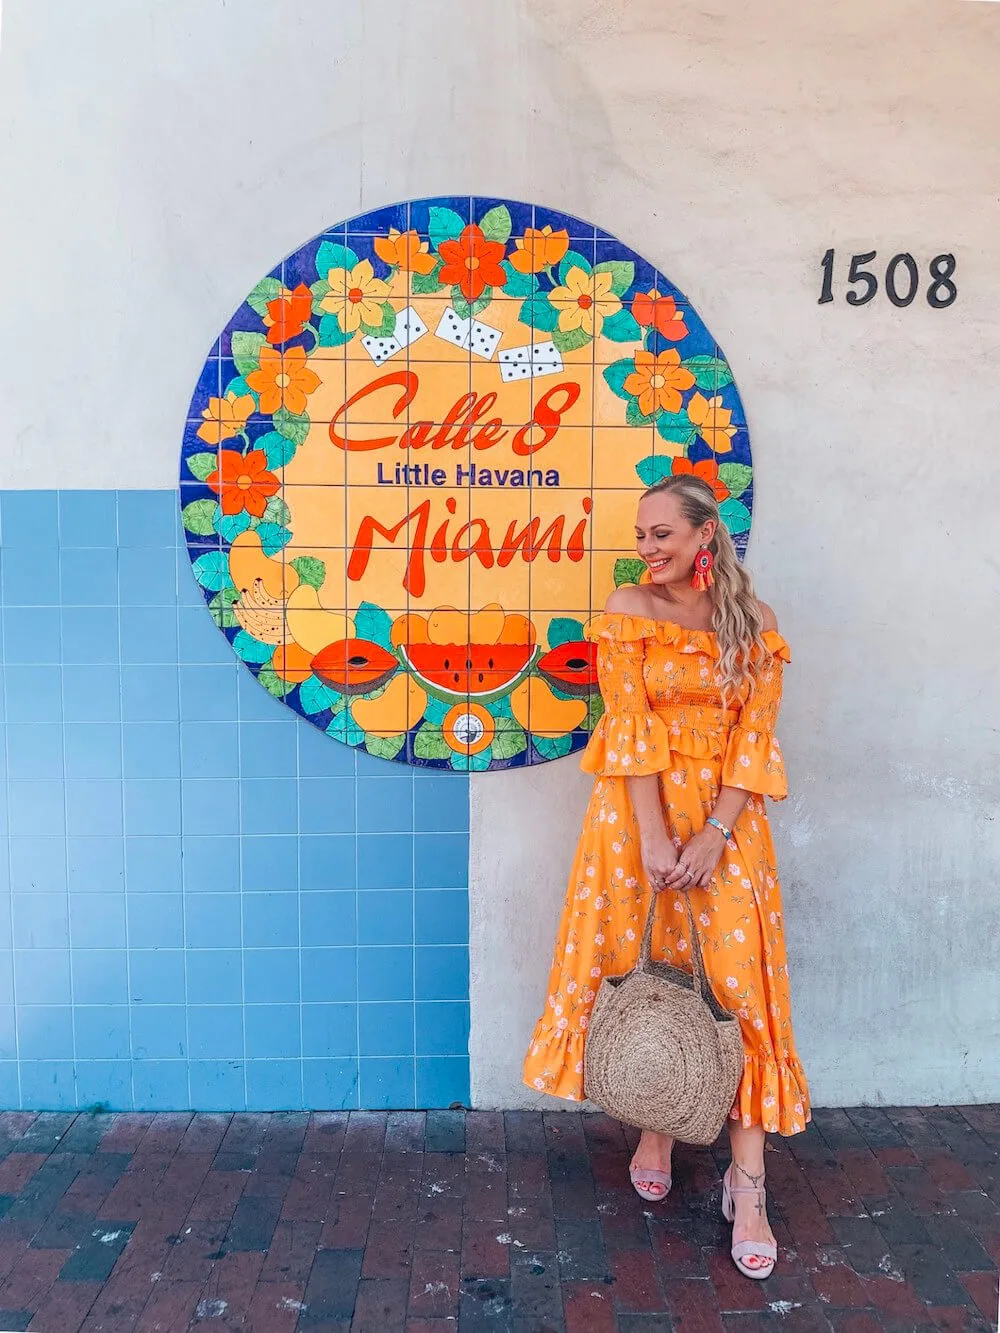 Is Little Havana safe? One of the most asked questions about Little Havana, and even Miami in general is whether it's safe for visitors and tourists. As a female traveler who has visited Little Havana myself, I am here to answer all your questions regarding the safety of Little Havana. I hope this post eases your fears and encourages you to visit this the vibrant neighborhood of Little Havana in Miami!